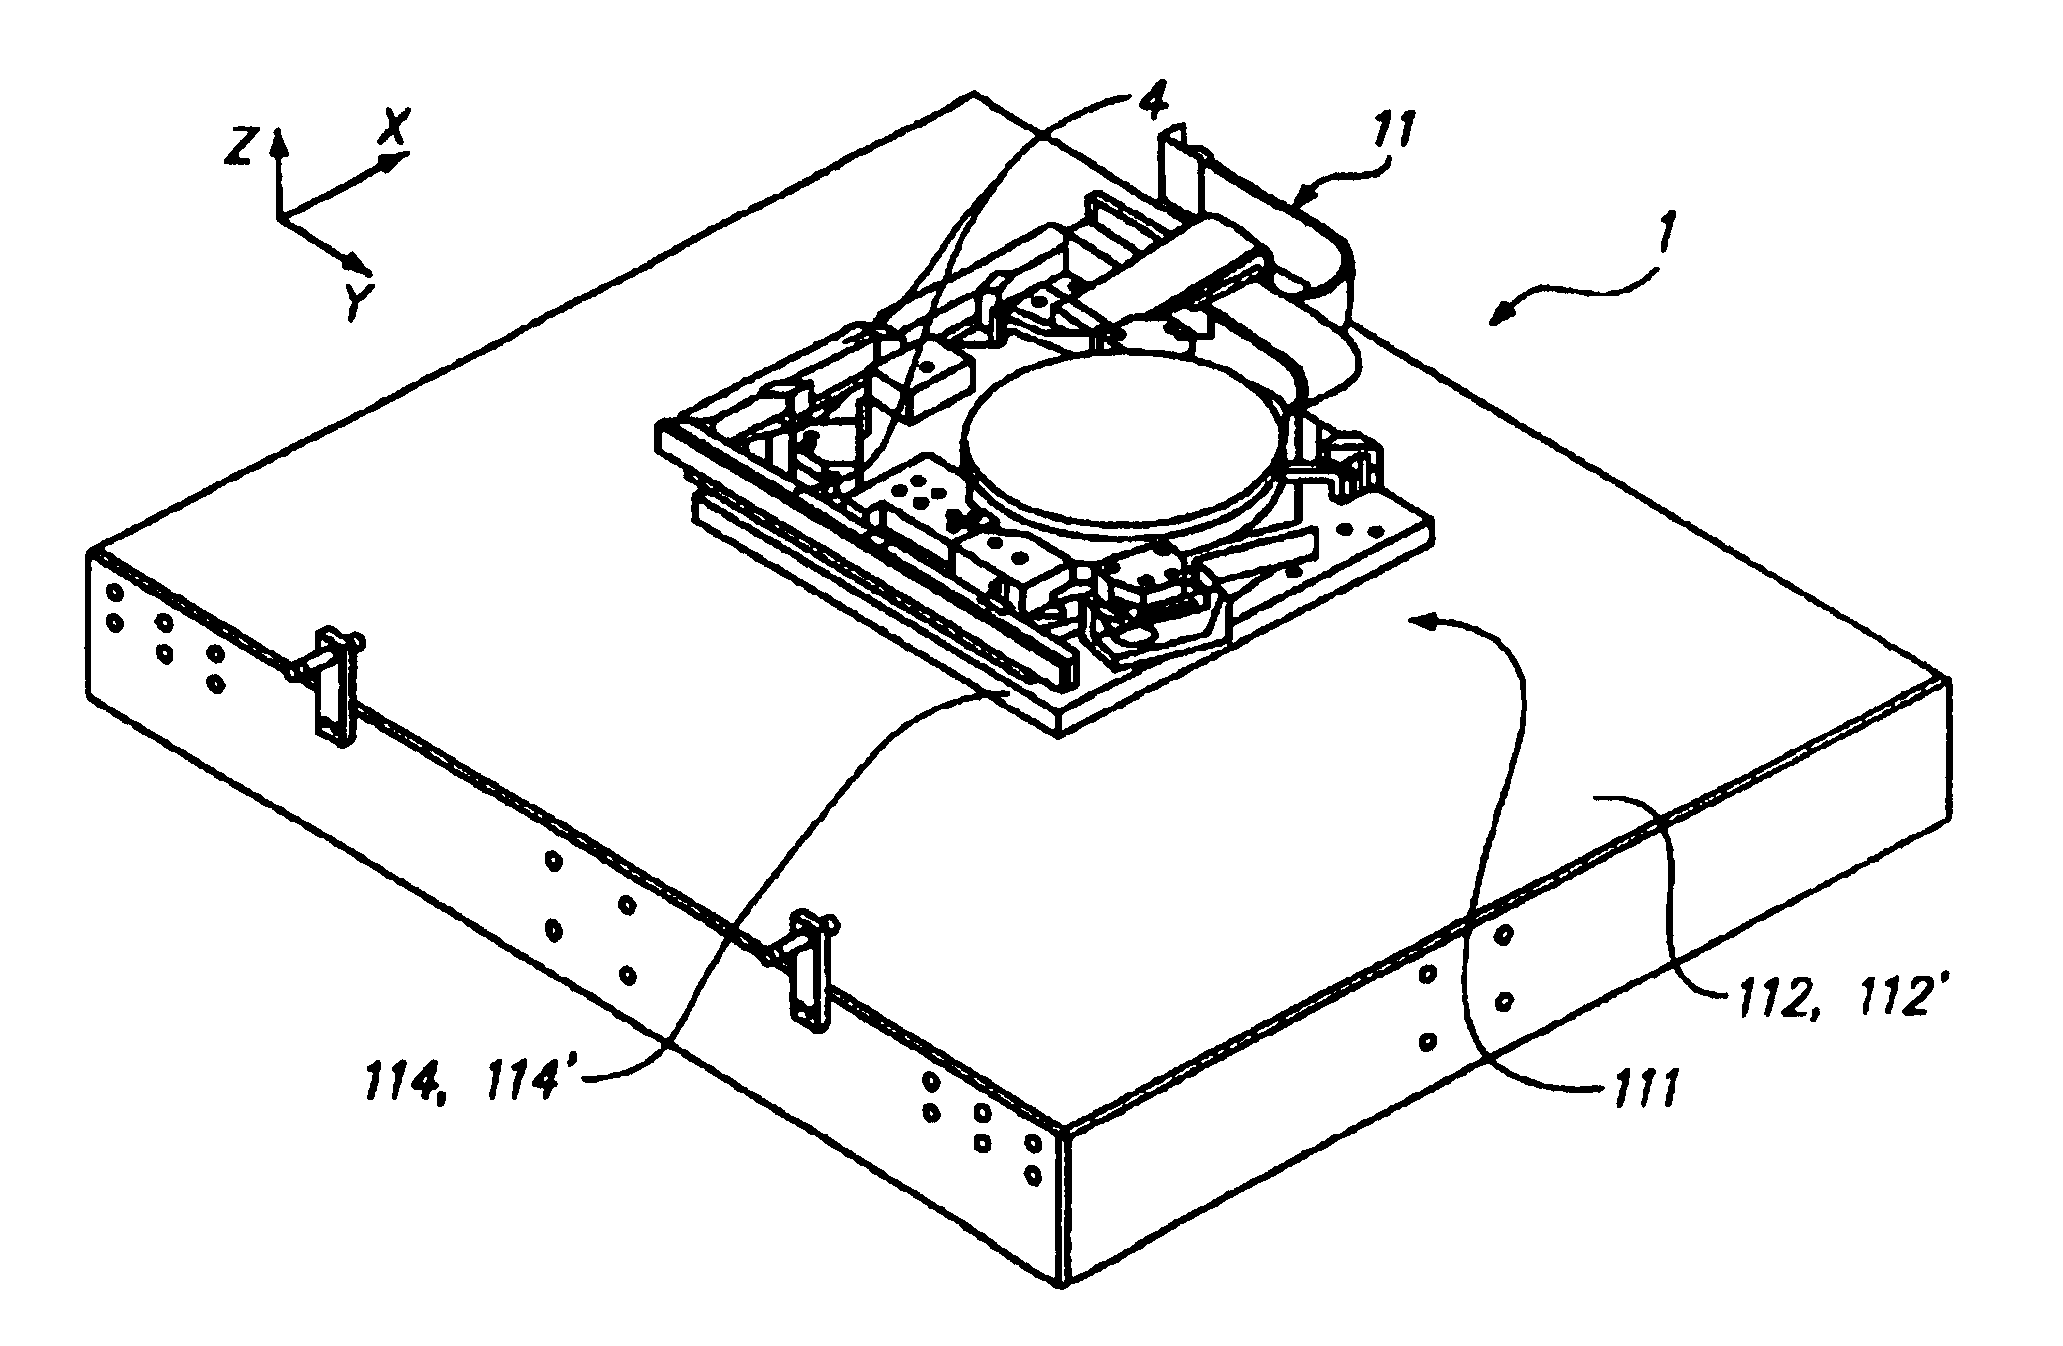 Wafer positioner with planar motor and mag-lev fine stage